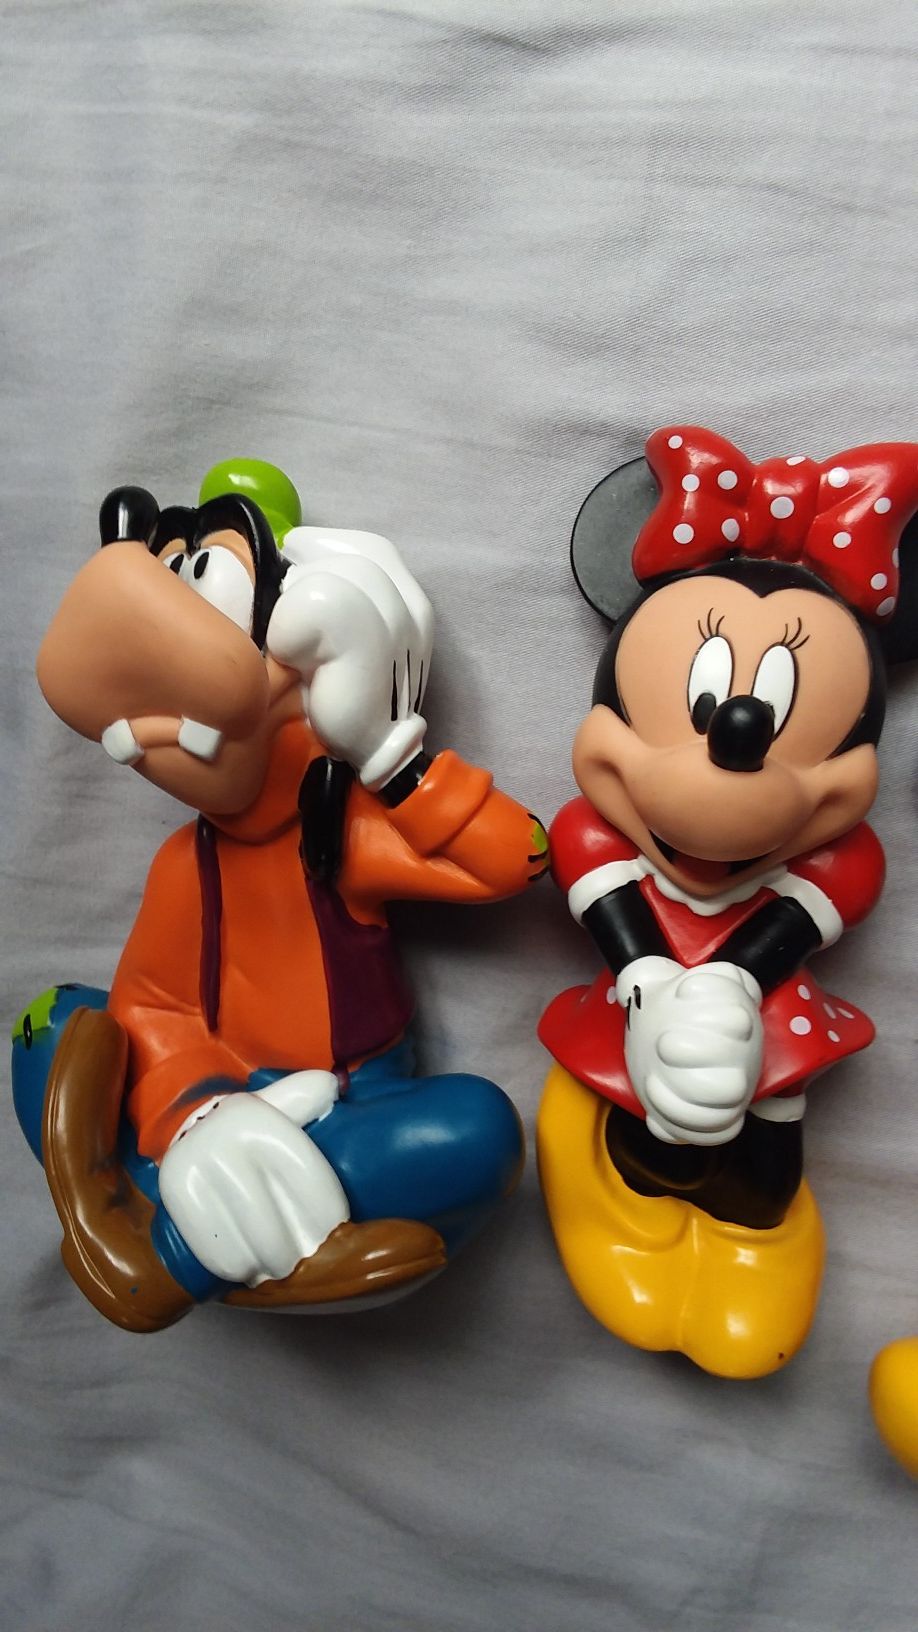 Collectible Mickey mouse toys